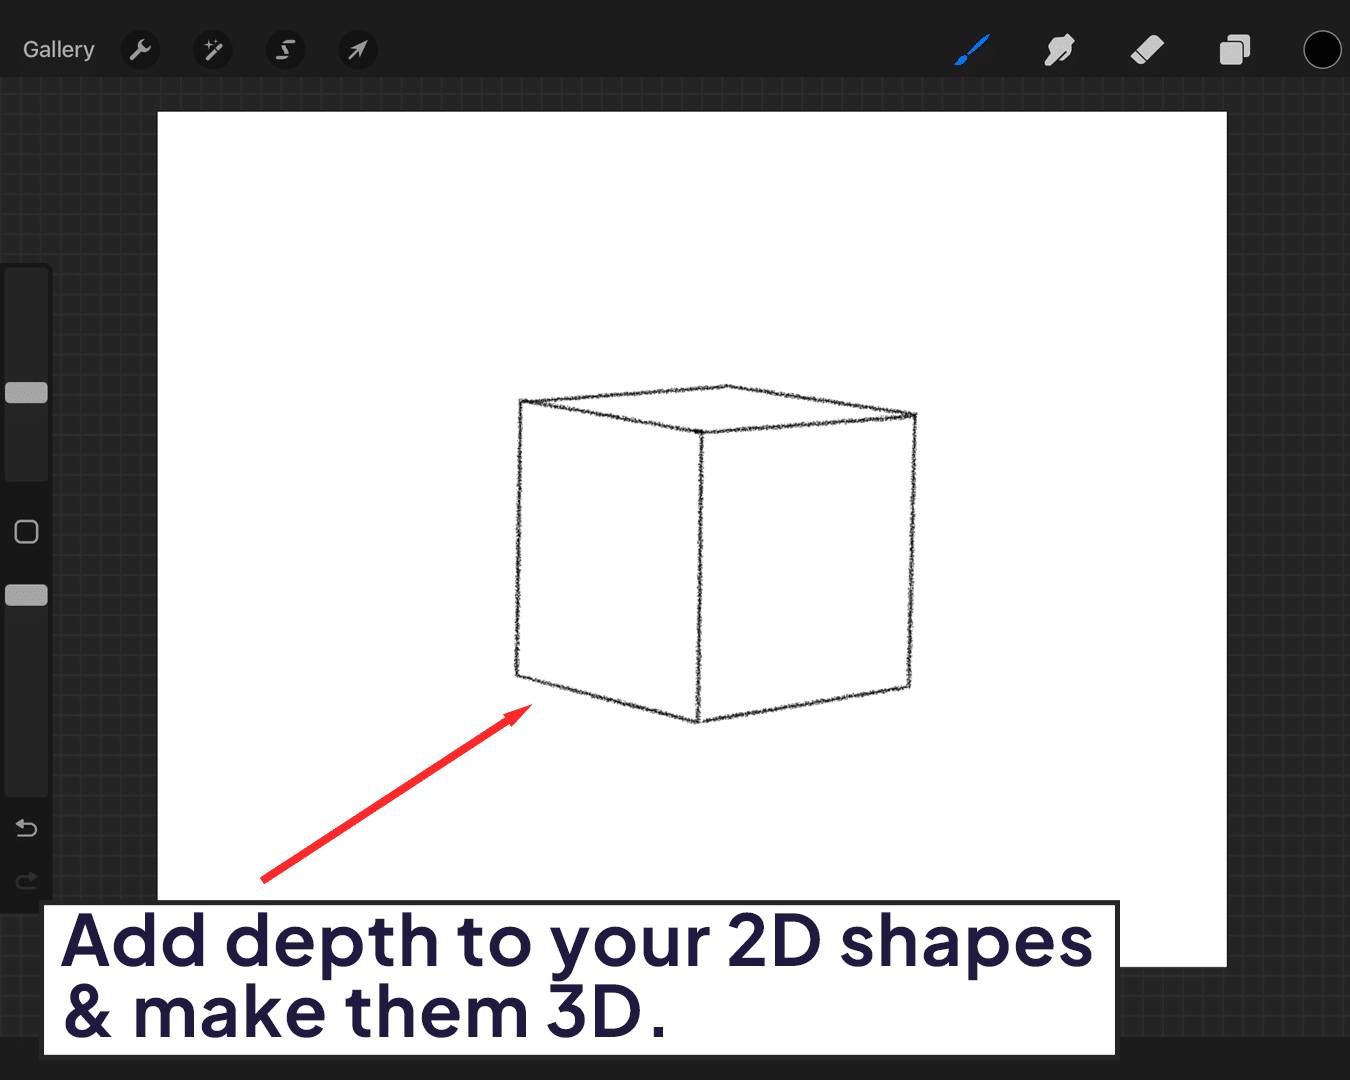 Making your 2D shapes into 3D